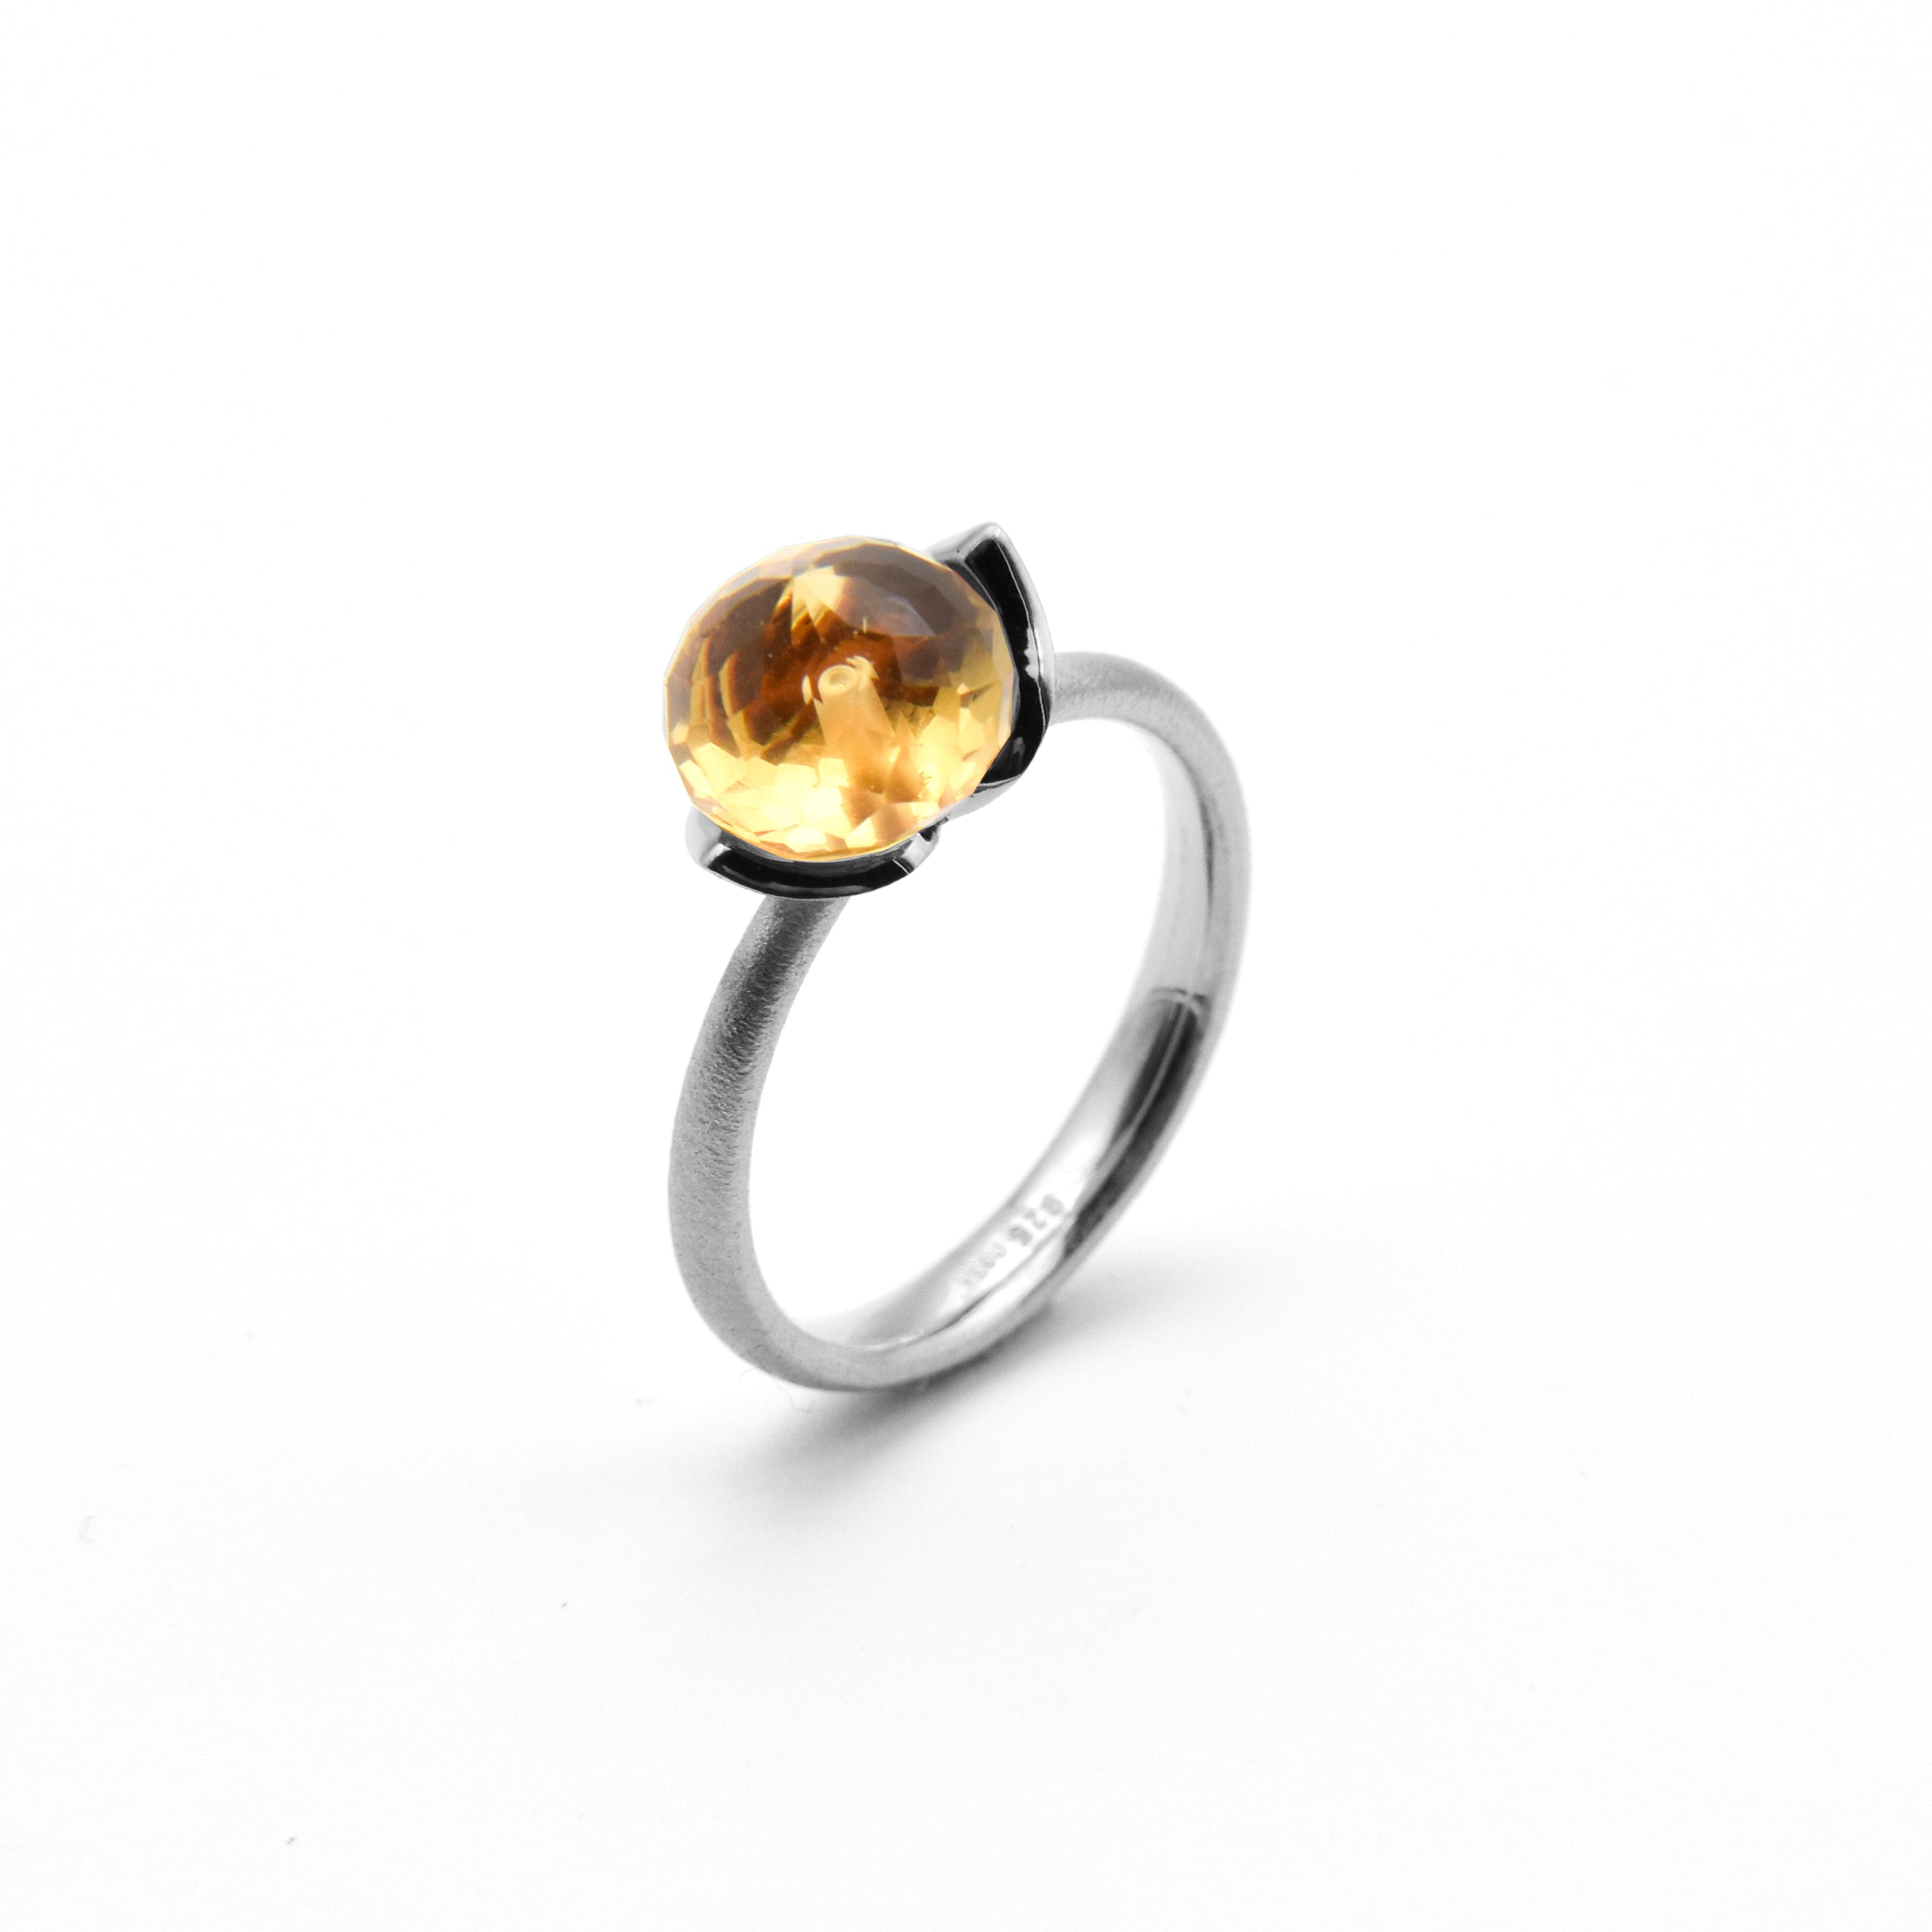 Dolce ring "smal" with champagne quartz 925/-